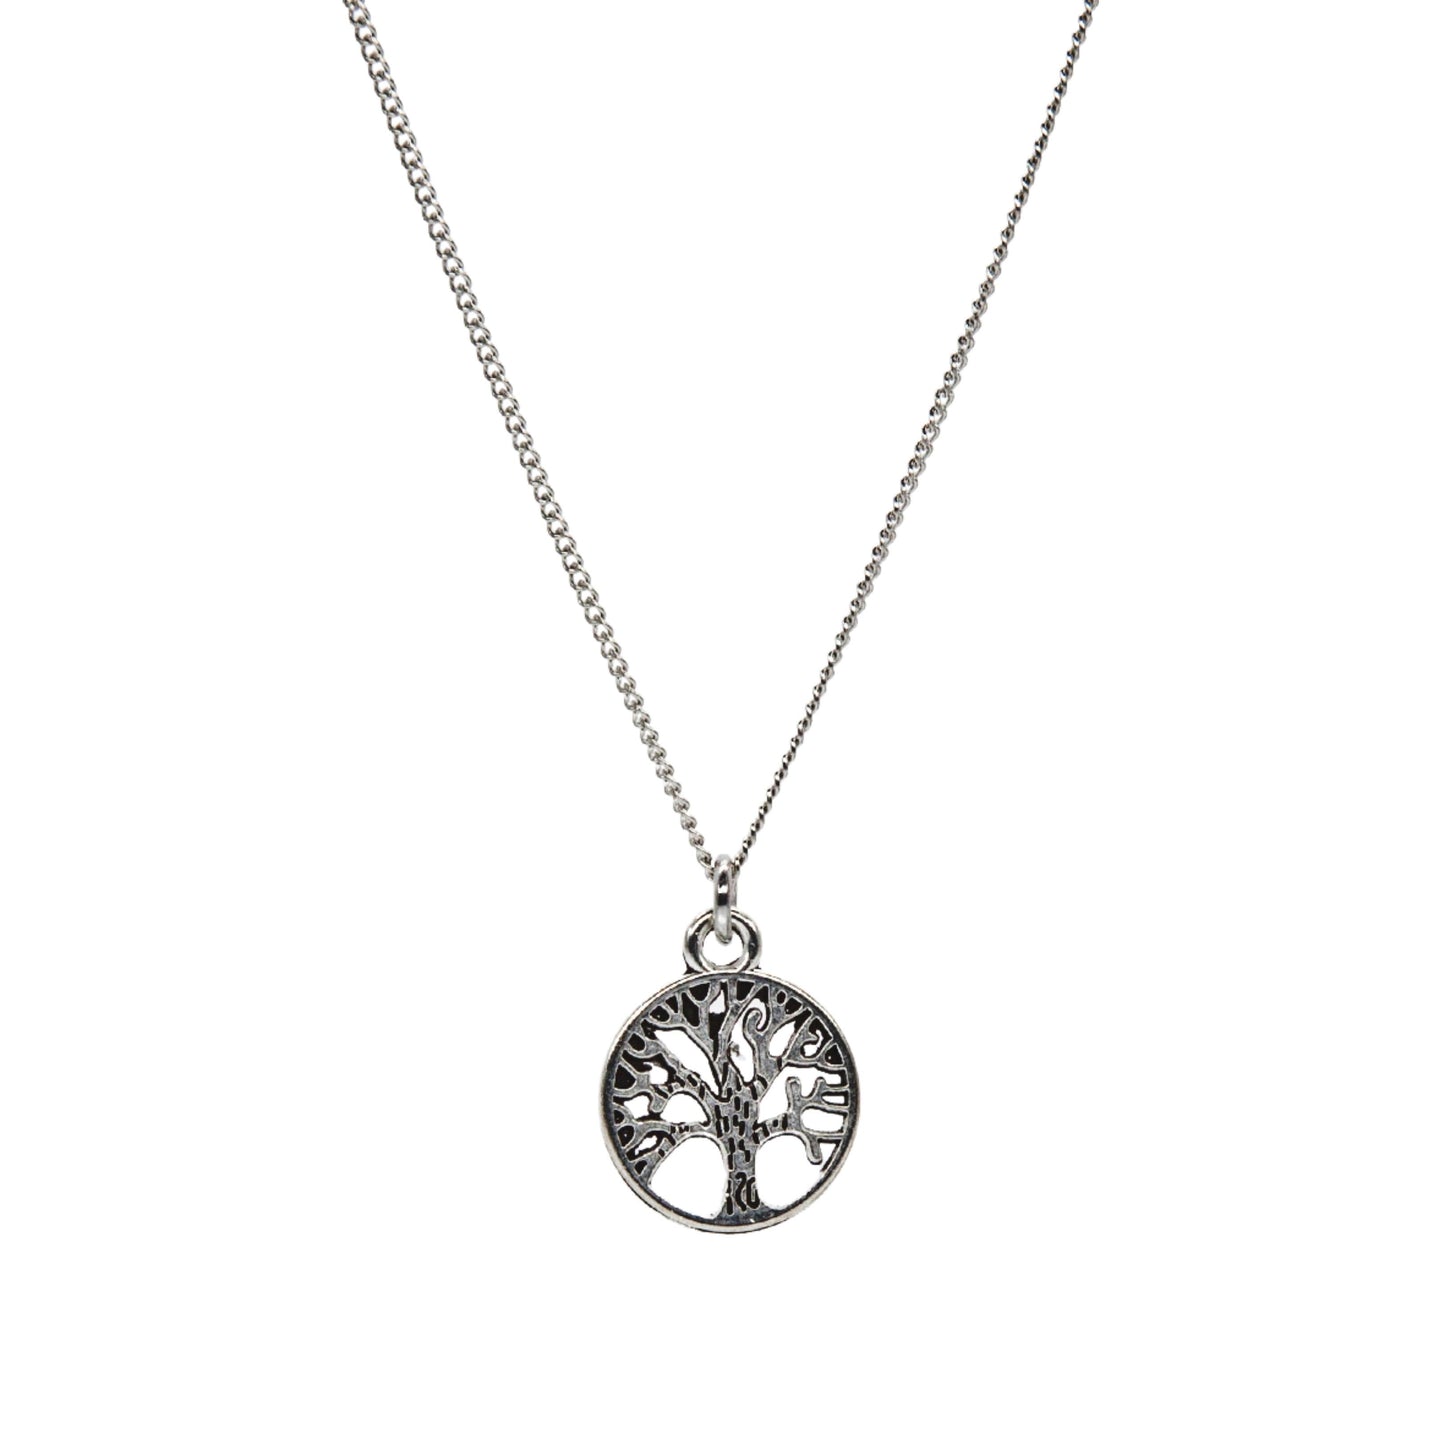 Silver Tree of Life  Necklace - Adjustable Length